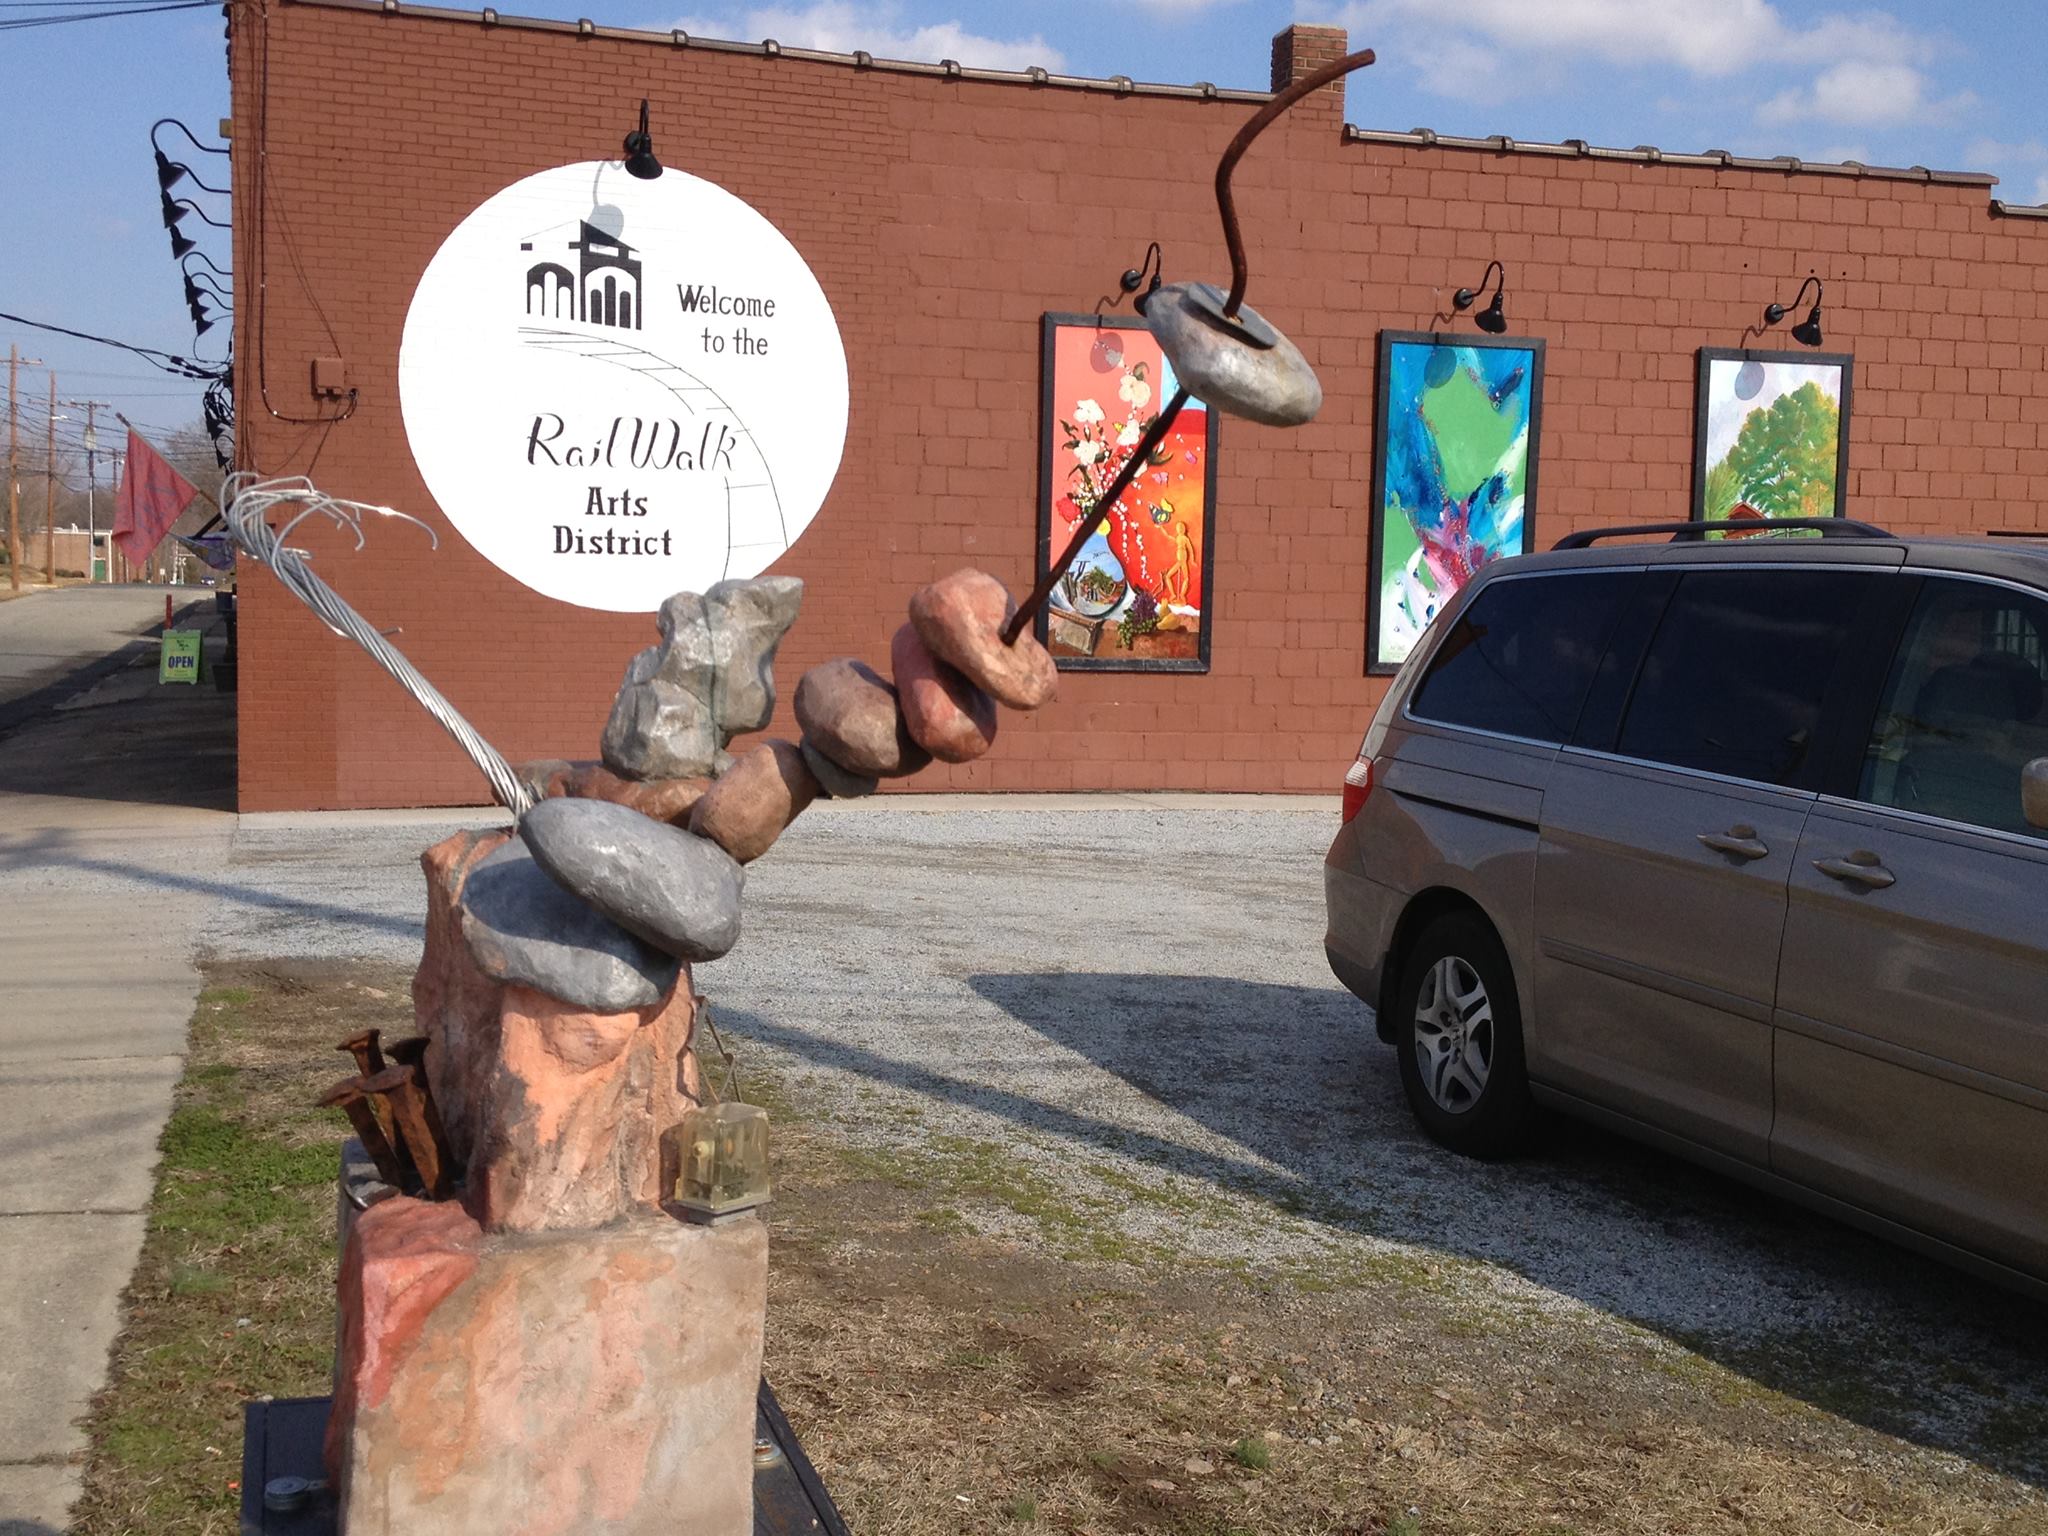 View of the railwalk signage, with an outdoor sculpture posed at the parking lot's corner